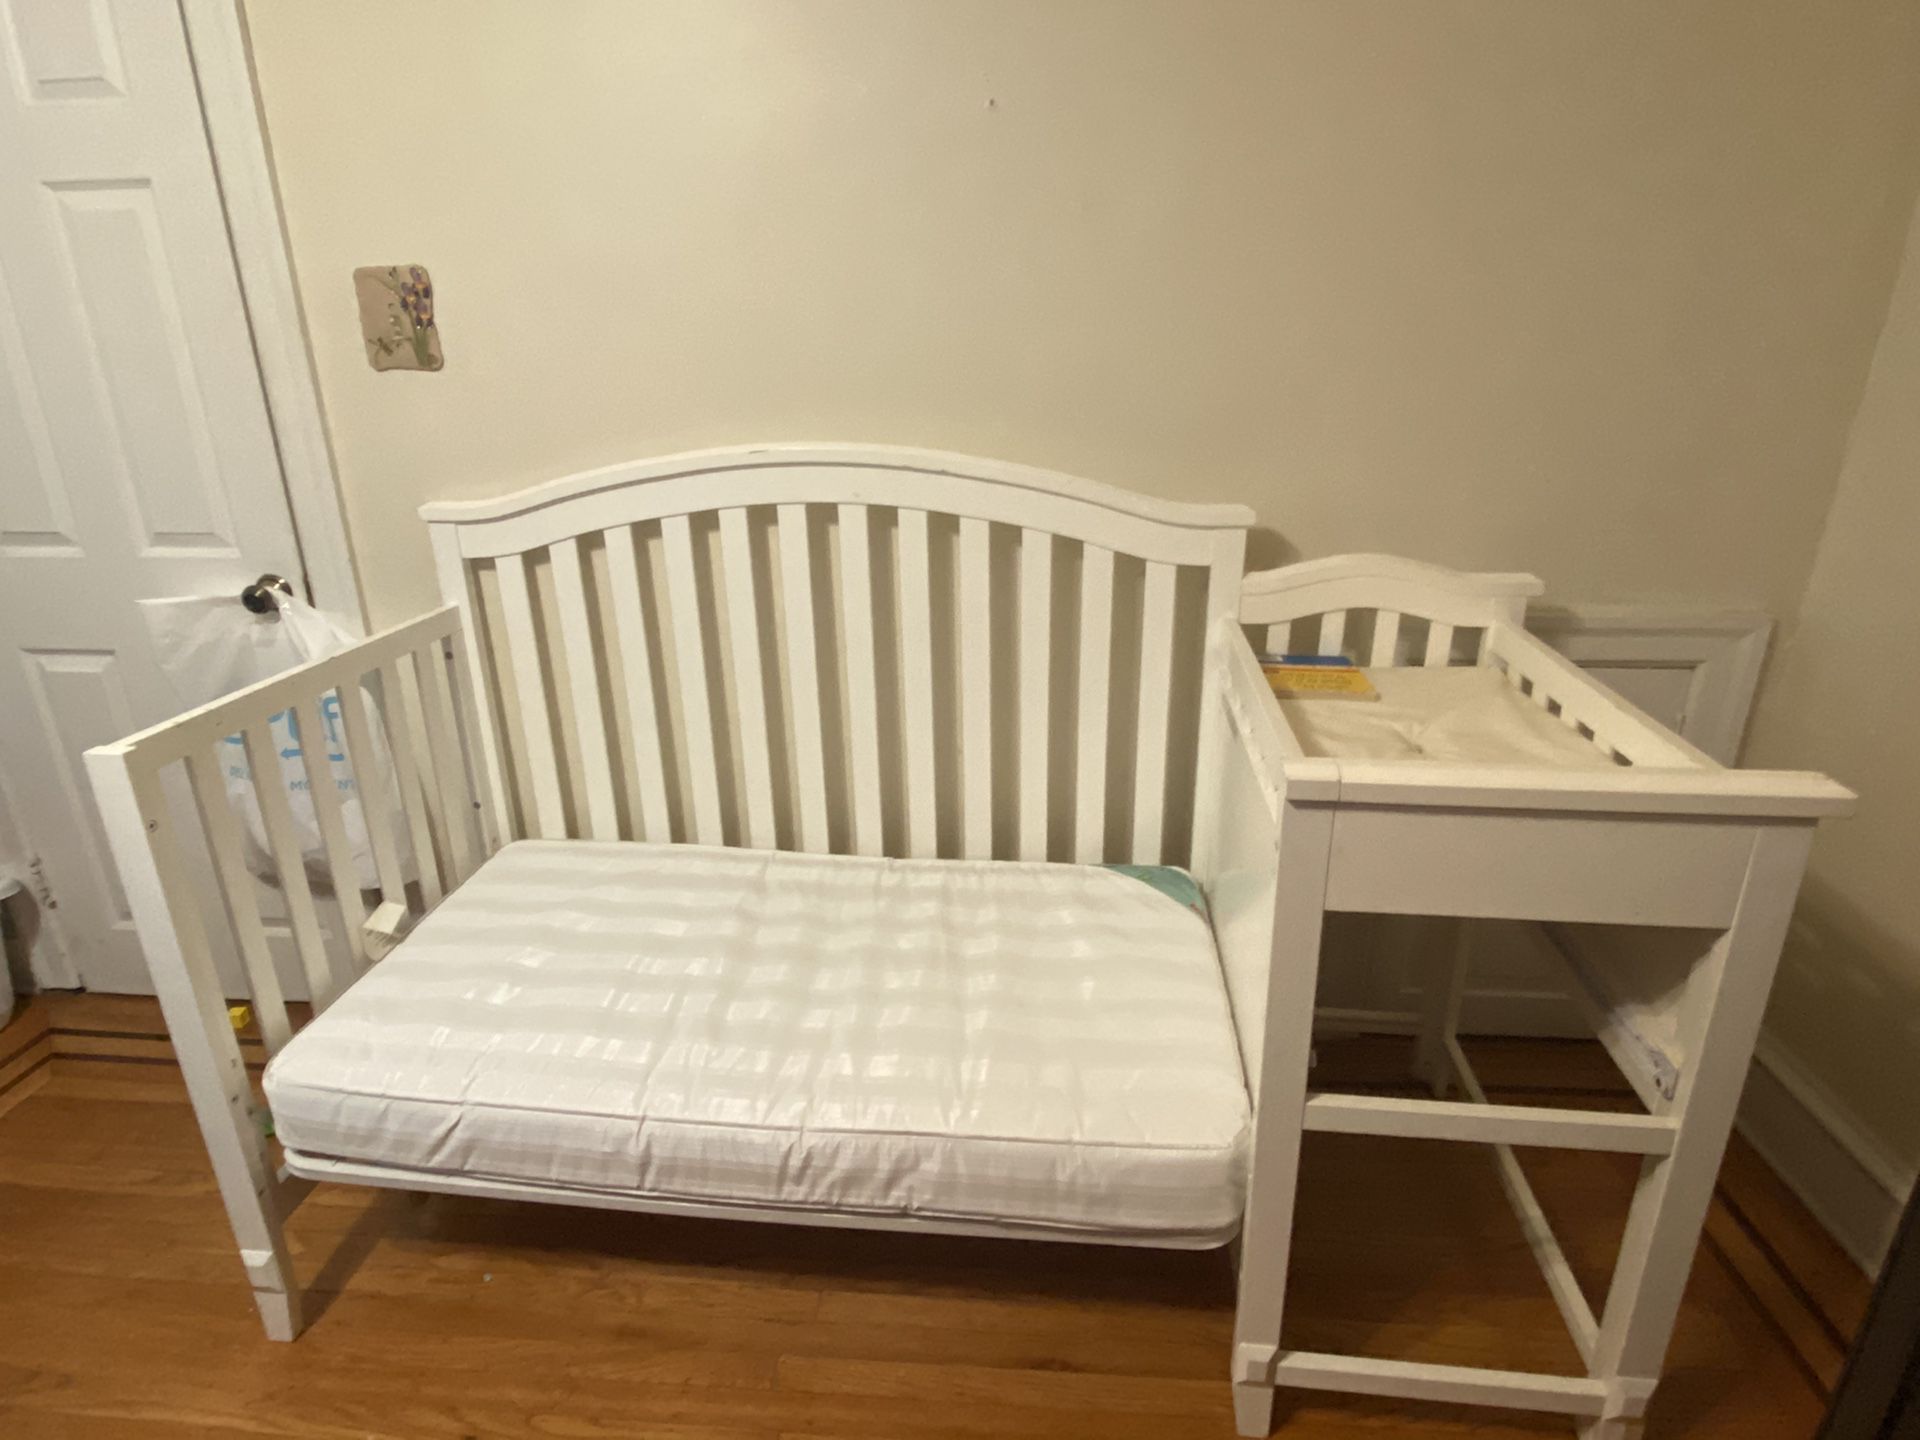 Baby bed with changing table